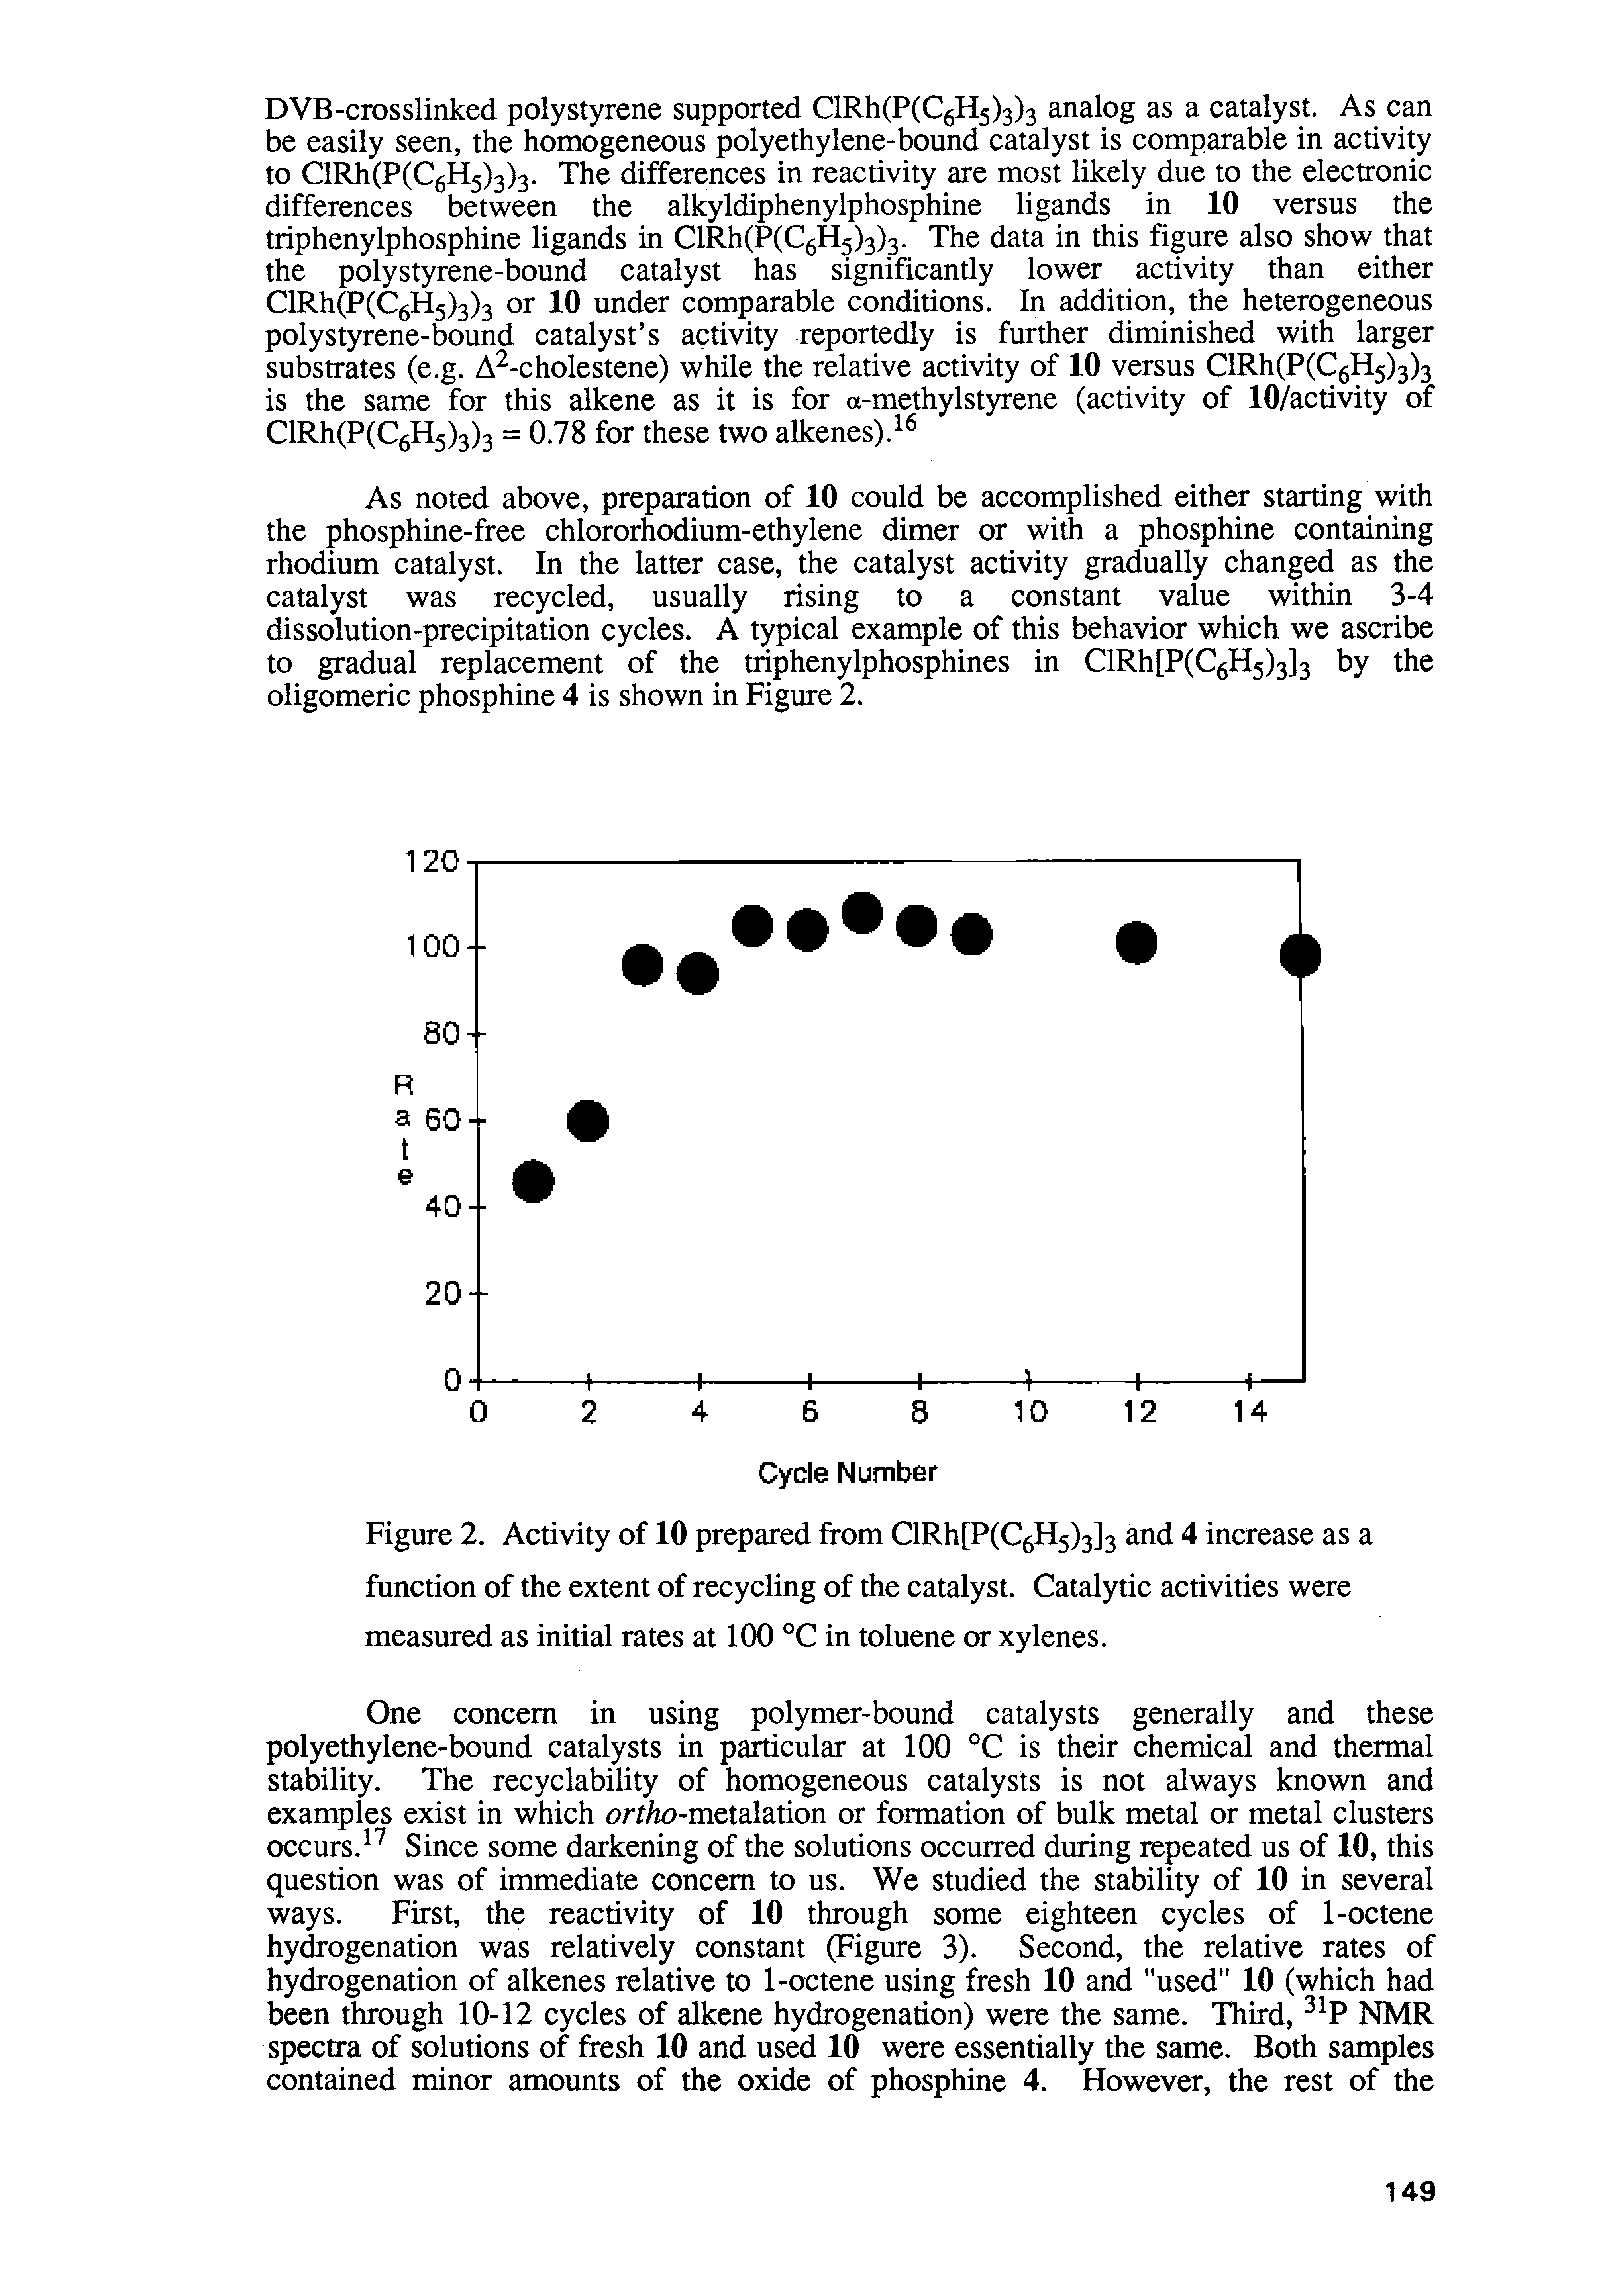 Figure 2. Activity of 10 prepared from ClRh[P(C6H5)3]3 and 4 increase as a function of the extent of recycling of the catalyst. Catalytic activities were measured as initial rates at 100 °C in toluene or xylenes.